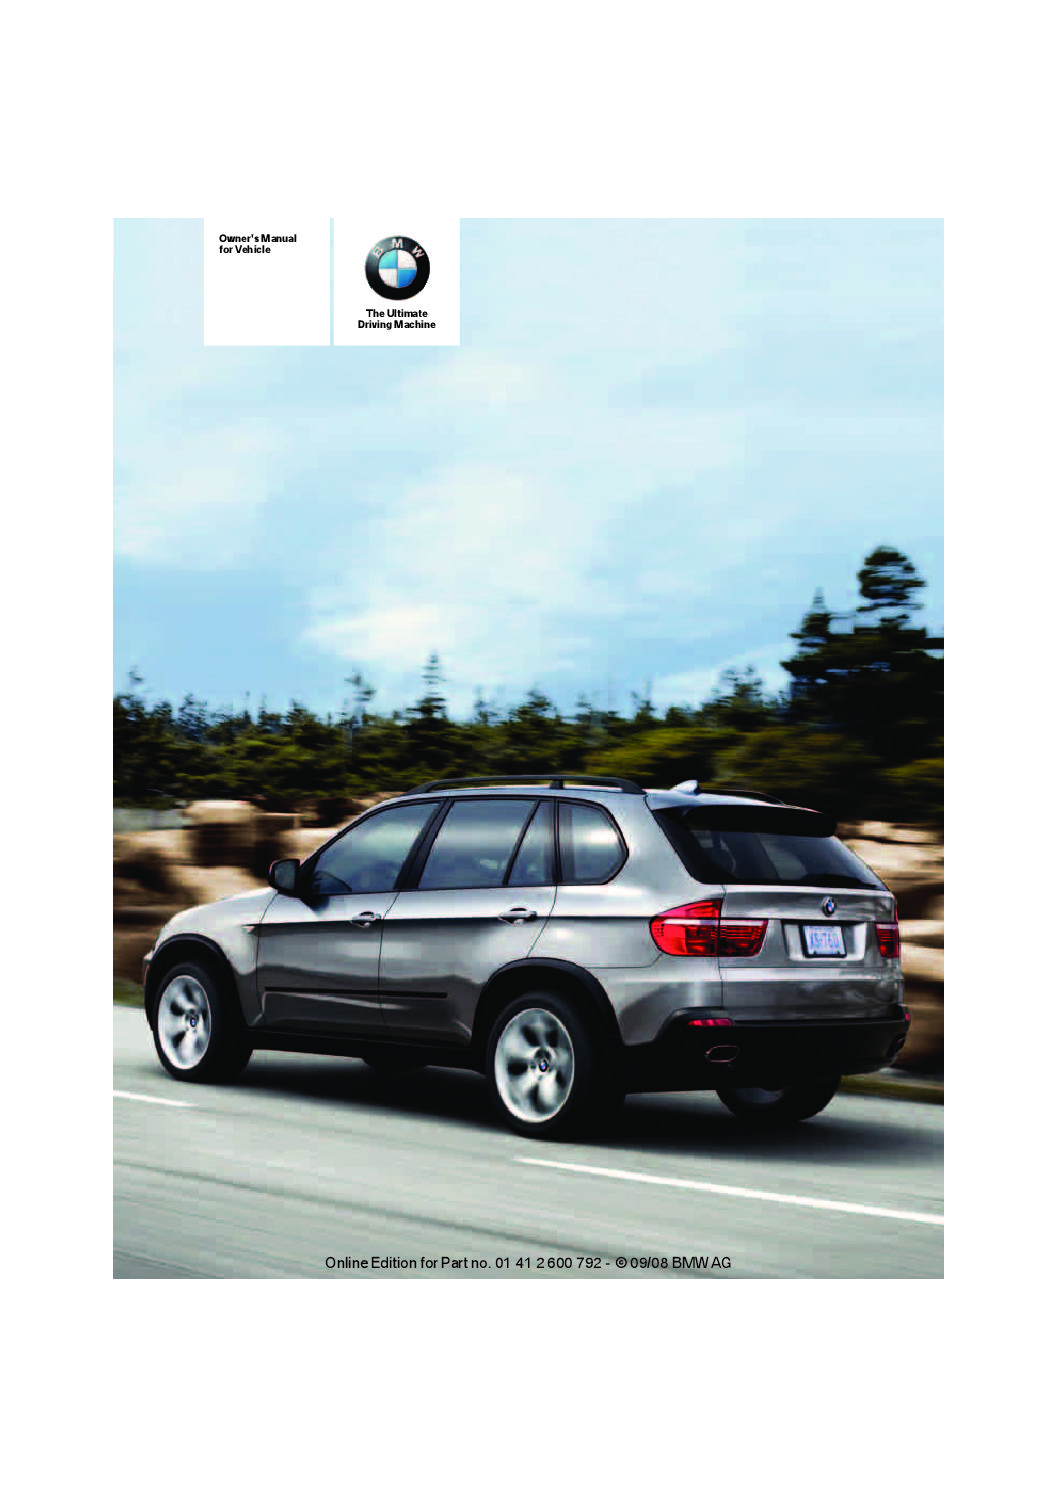 2009 BMW X5 Owner’s Manual Image